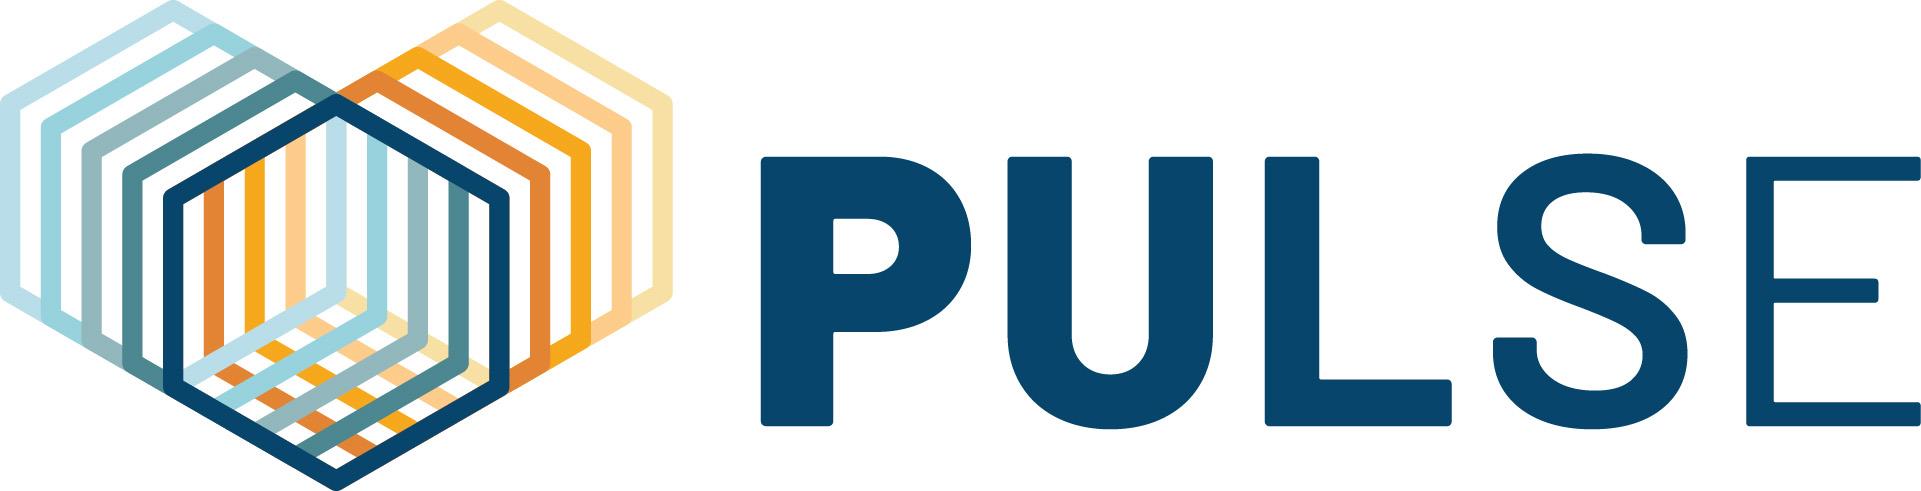 The Shipyard Launches PULSE Breaks Ground with First True Holistic Measurement of Brand Love – Marketing Communication News